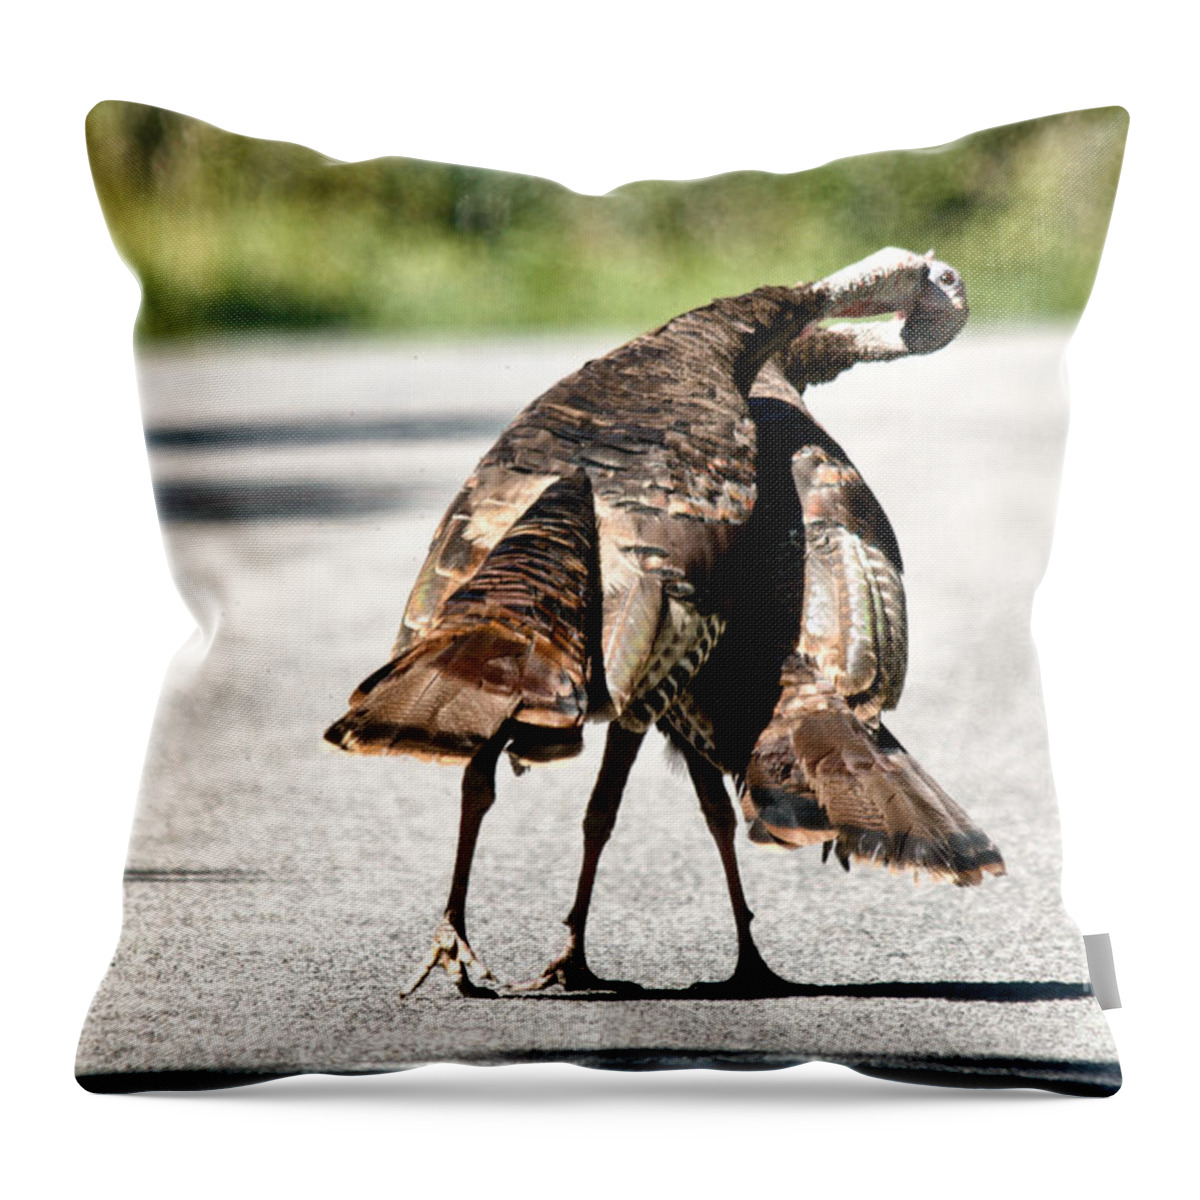 Turkey Throw Pillow featuring the photograph Turkey Fight by Cheryl Baxter